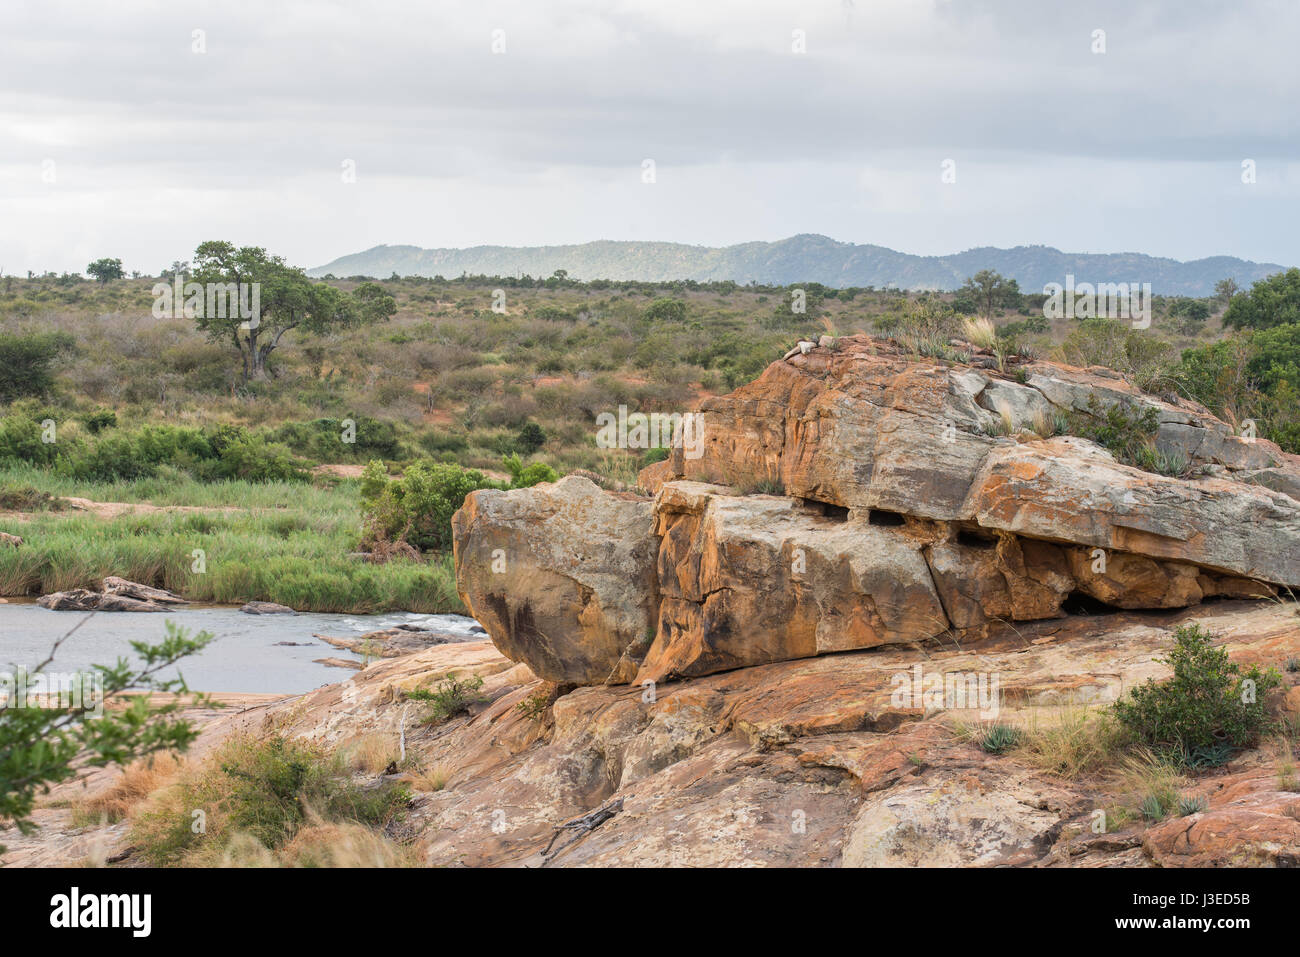 Scenic landscape of a rocky outcrop along the Sabie River with mountains in the background Stock Photo